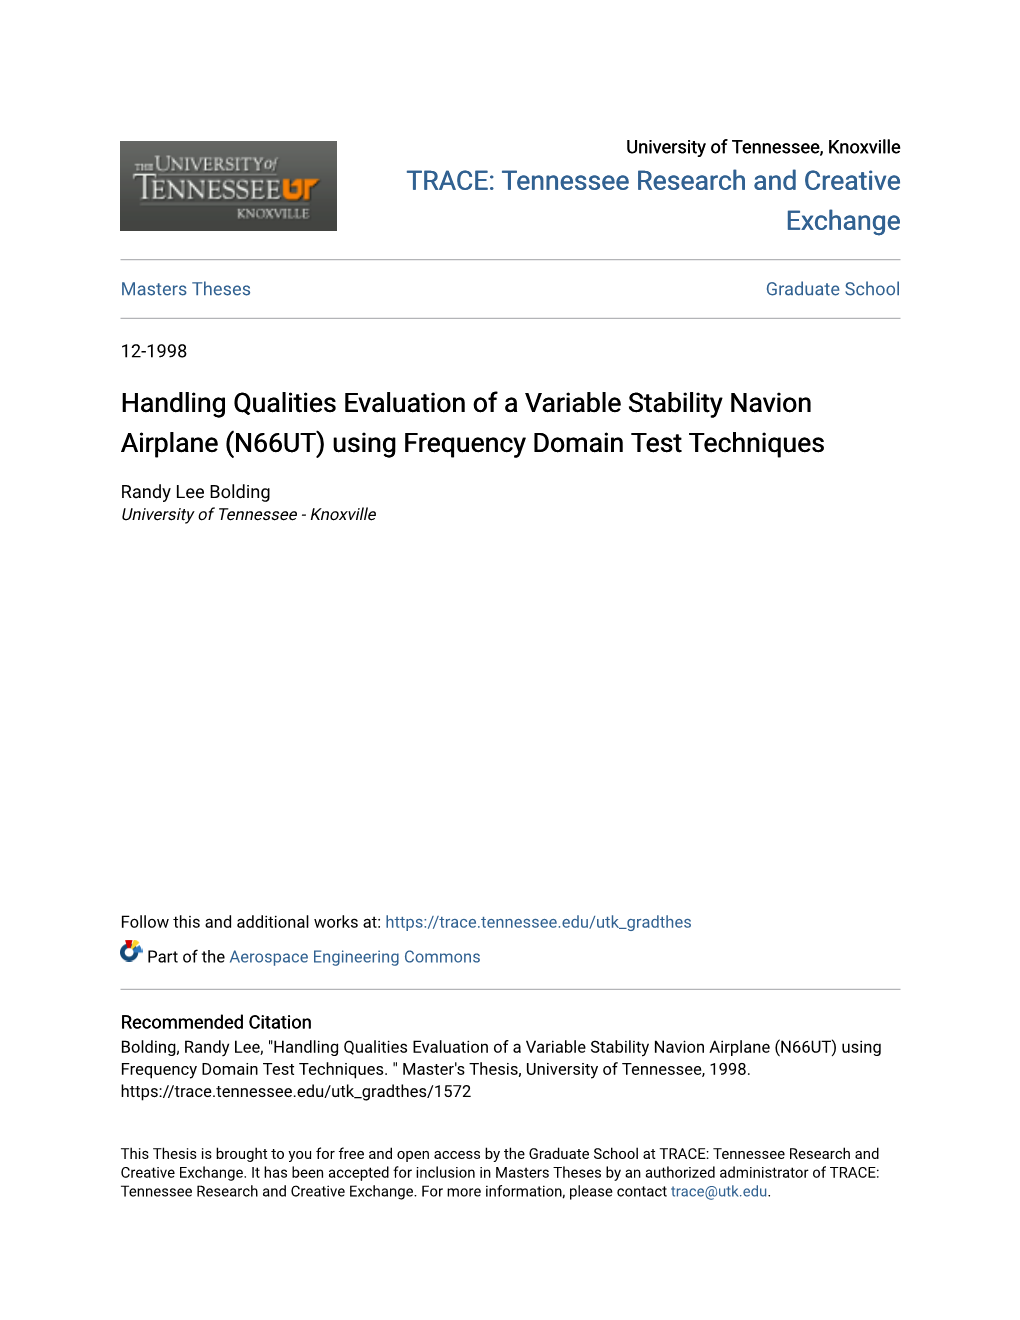 Handling Qualities Evaluation of a Variable Stability Navion Airplane (N66UT) Using Frequency Domain Test Techniques